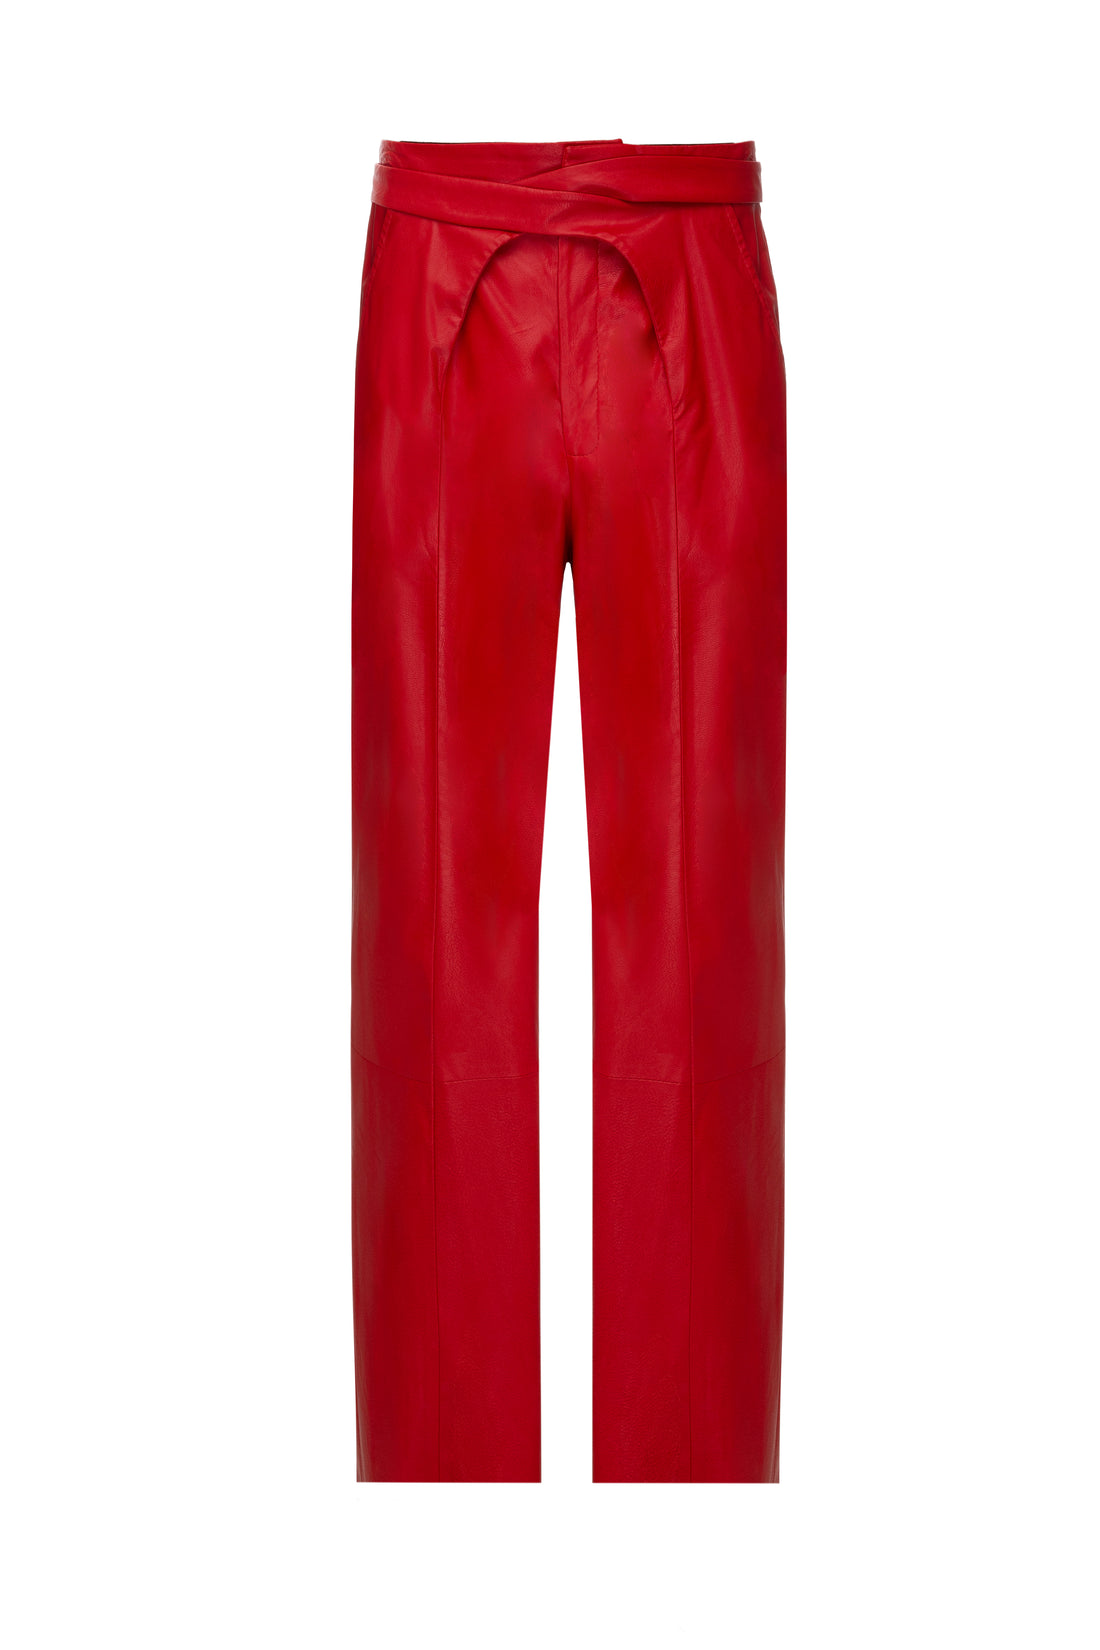 SITUATIONIST Red Pants in Vegan Leather